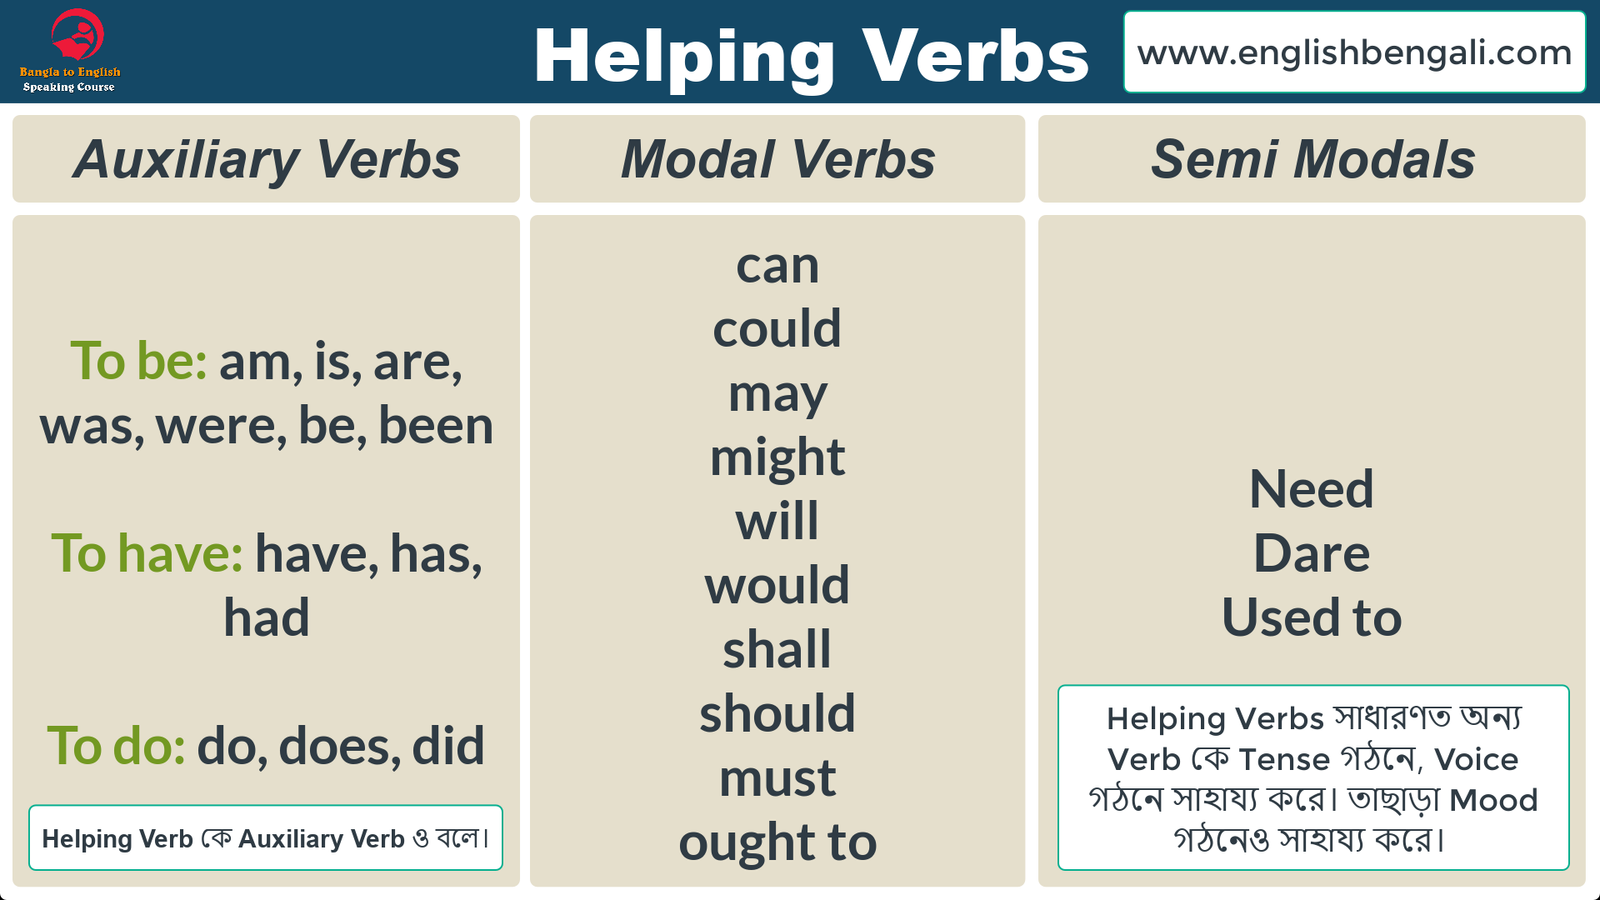 33-examples-of-modal-auxiliary-verbs-english-verbs-english-vocabulary-words-learning-english